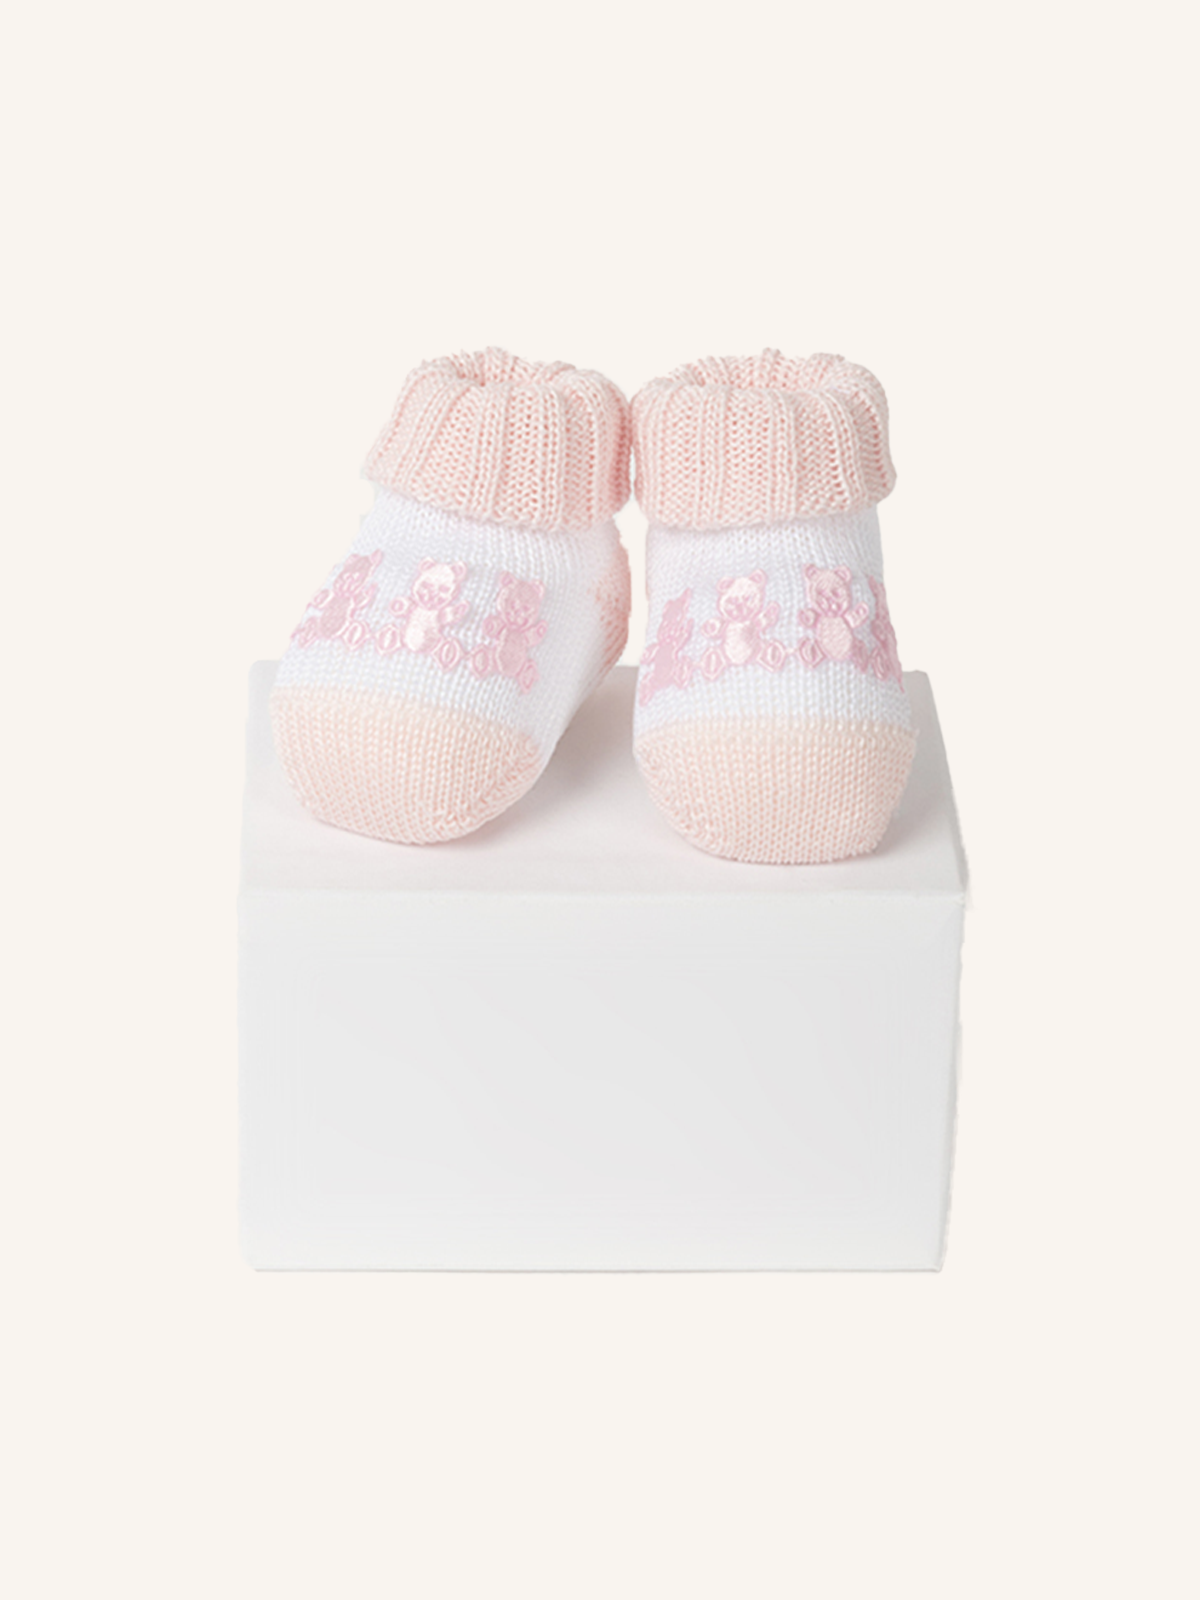 Slipper in Cotton with Teddy Bears for Newborn | Solid Color | Pack of 1 Pair | 42567